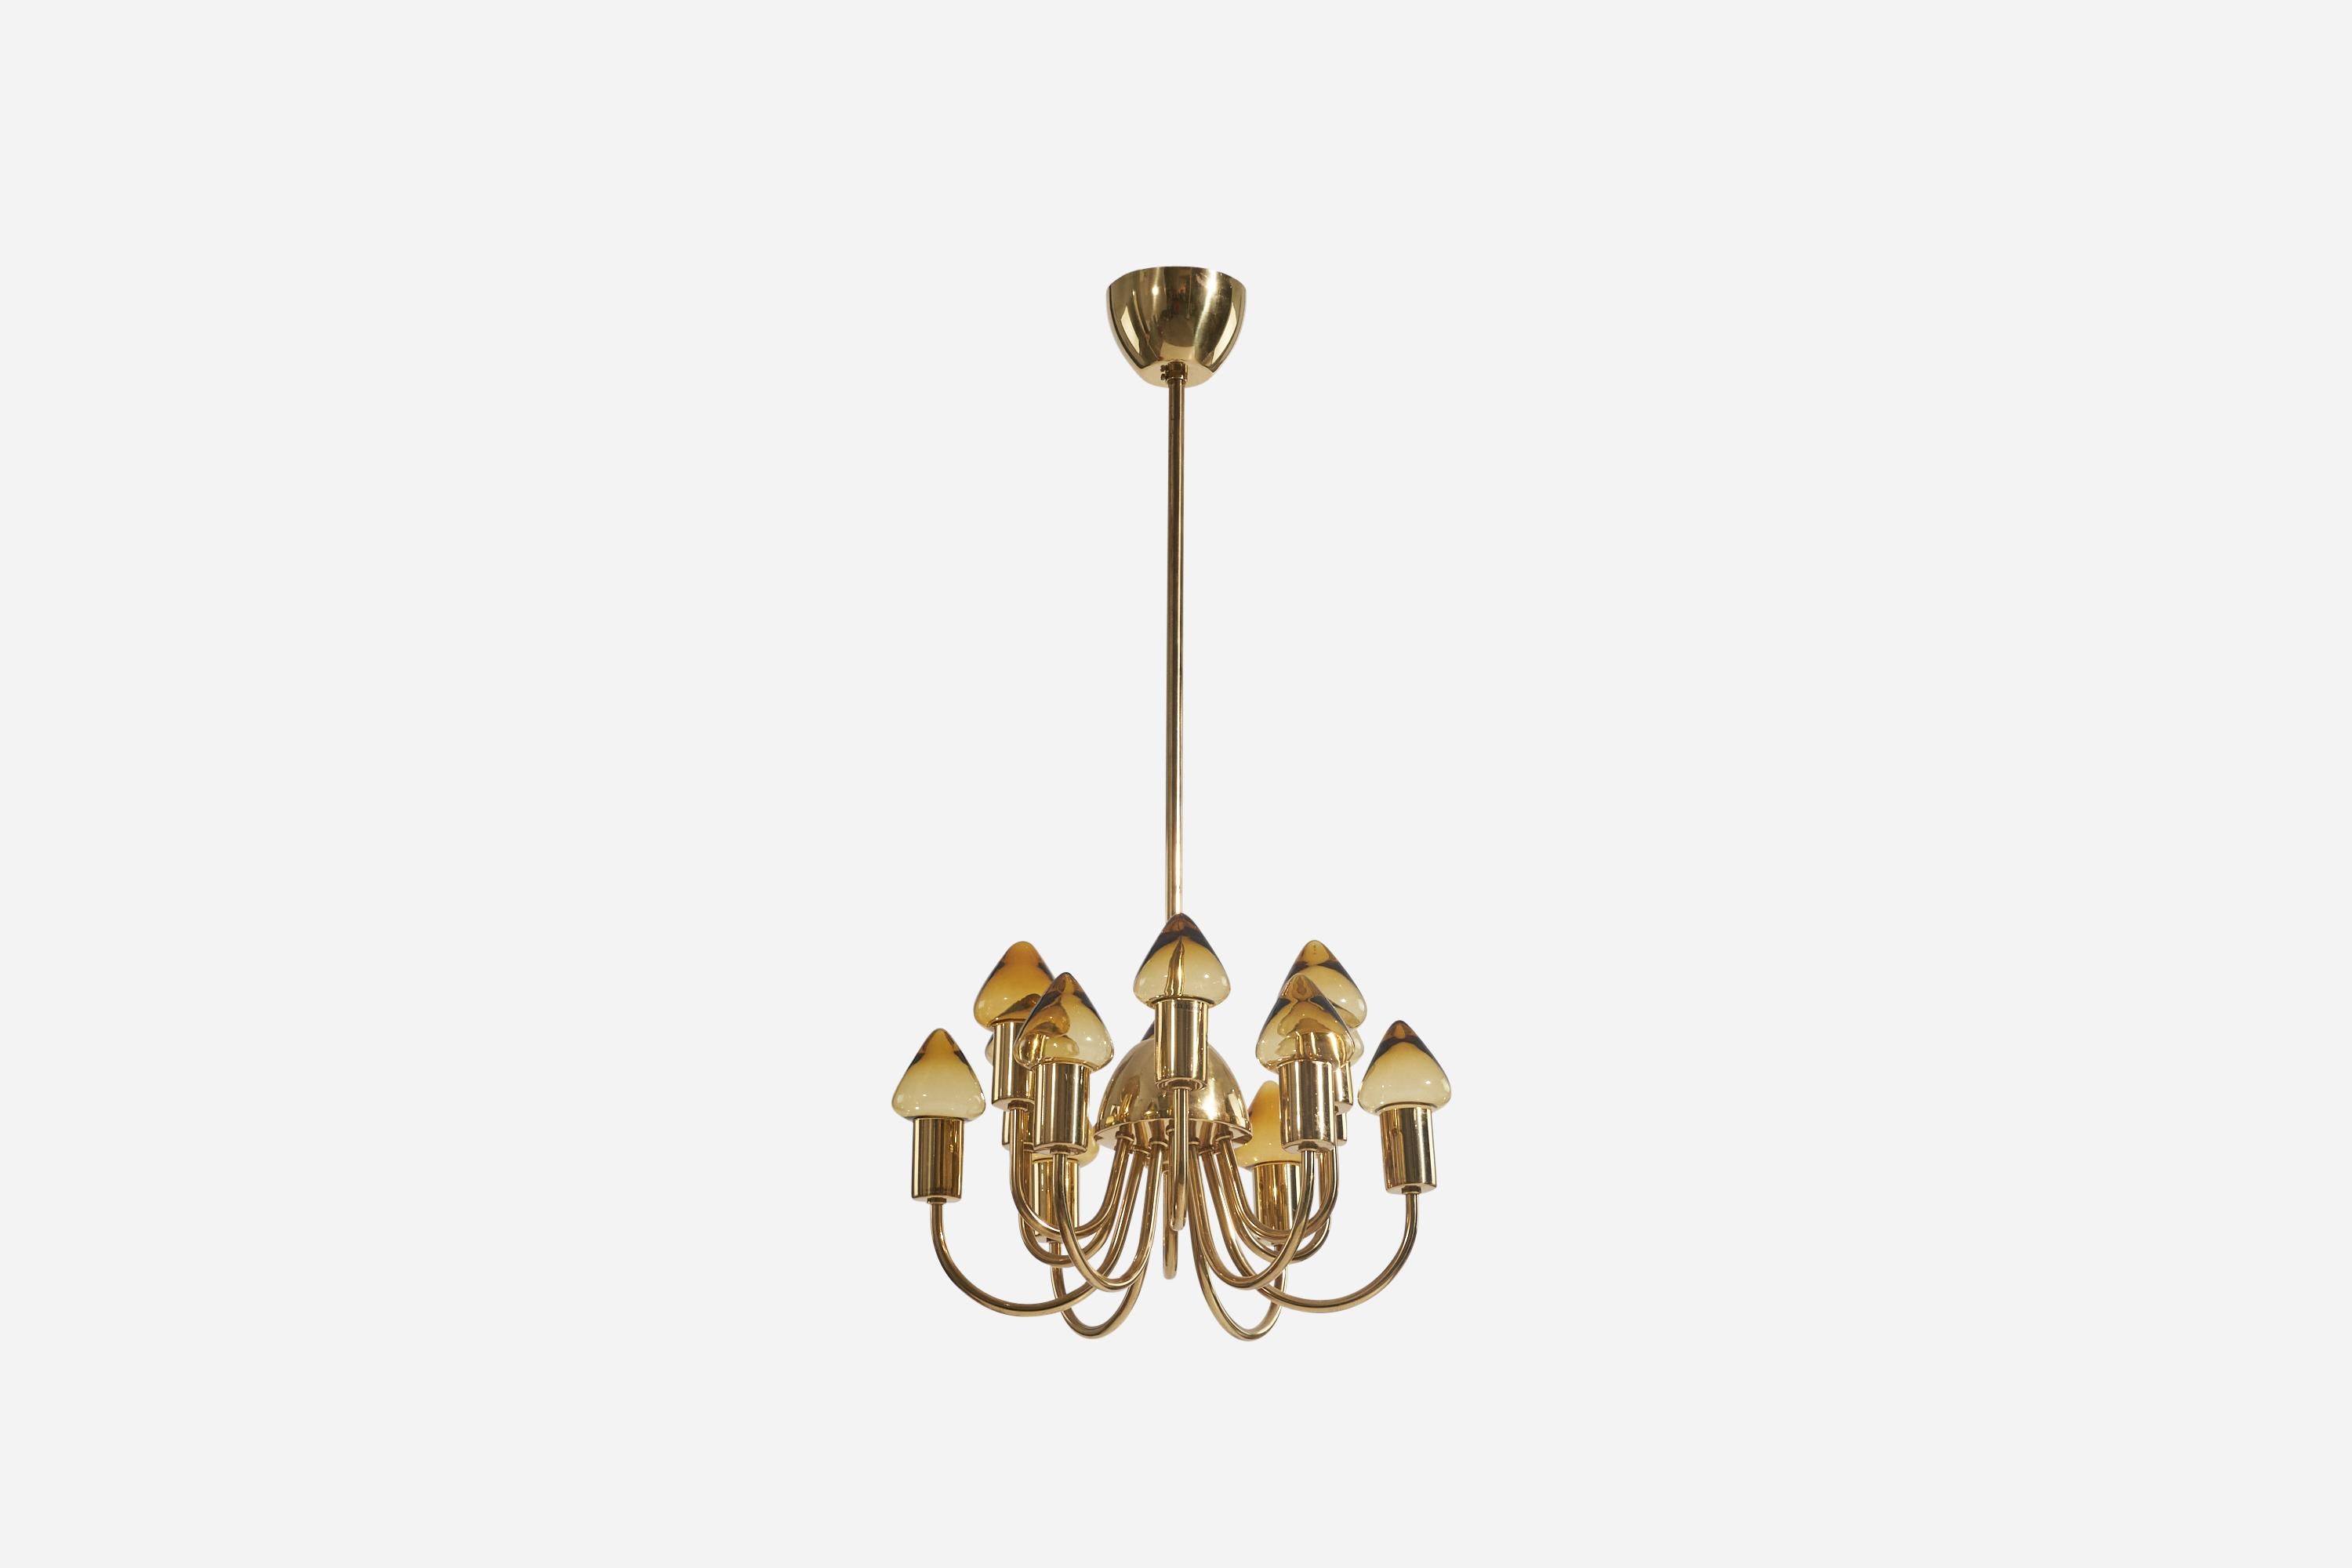 A brass and glass chandelier designed and produced by Hans-Agne Jakobsson, Sweden, 1970s.

Dimensions of Canopy (inches) : 2.6 x 4.37 x 4.37 (Height x Width x Depth).

Socket takes E-14 bulb.
There is no maximum wattage stated on the fixture.